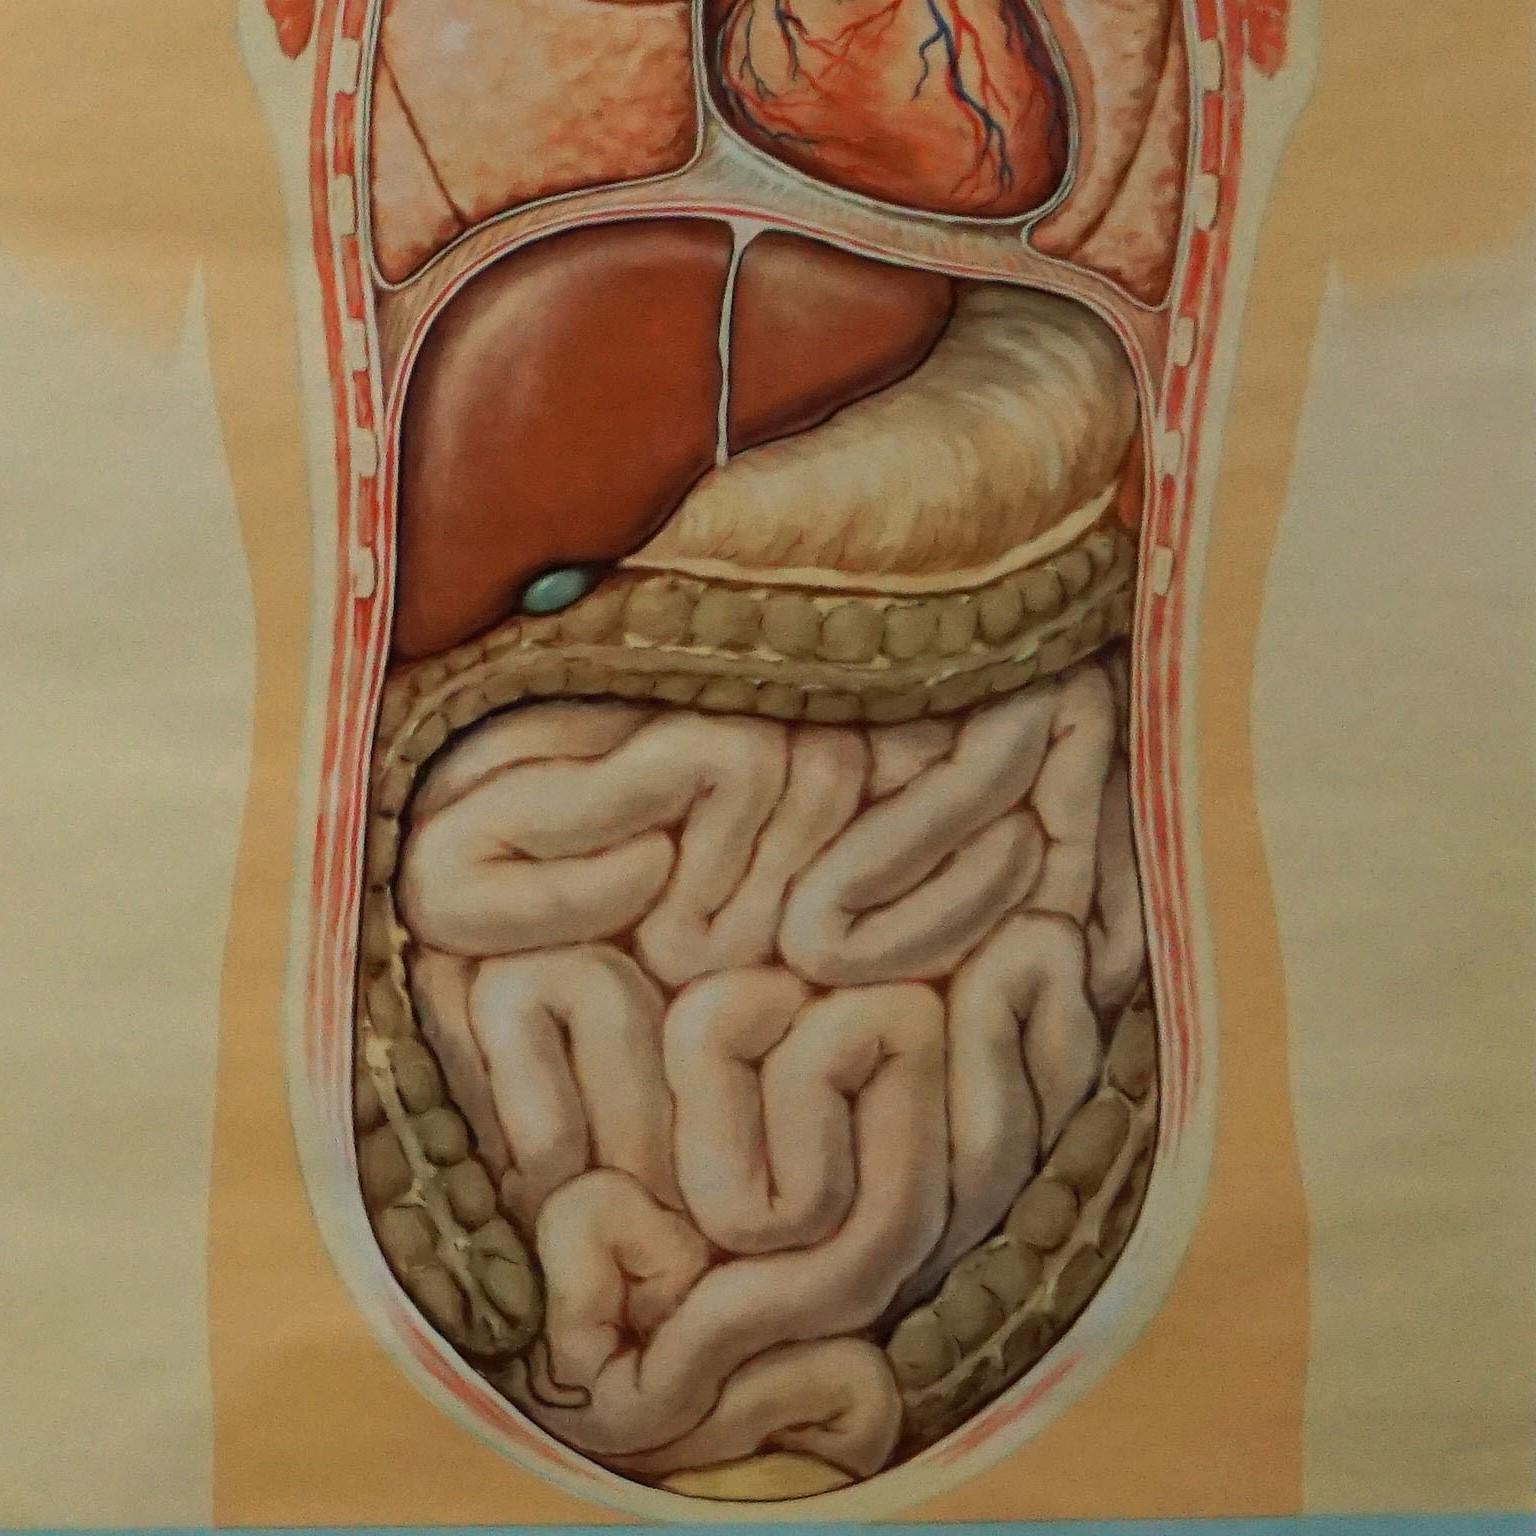 German Hagemann Human Body Mural Poster Wall Chart Print Digestive Tract of Food For Sale